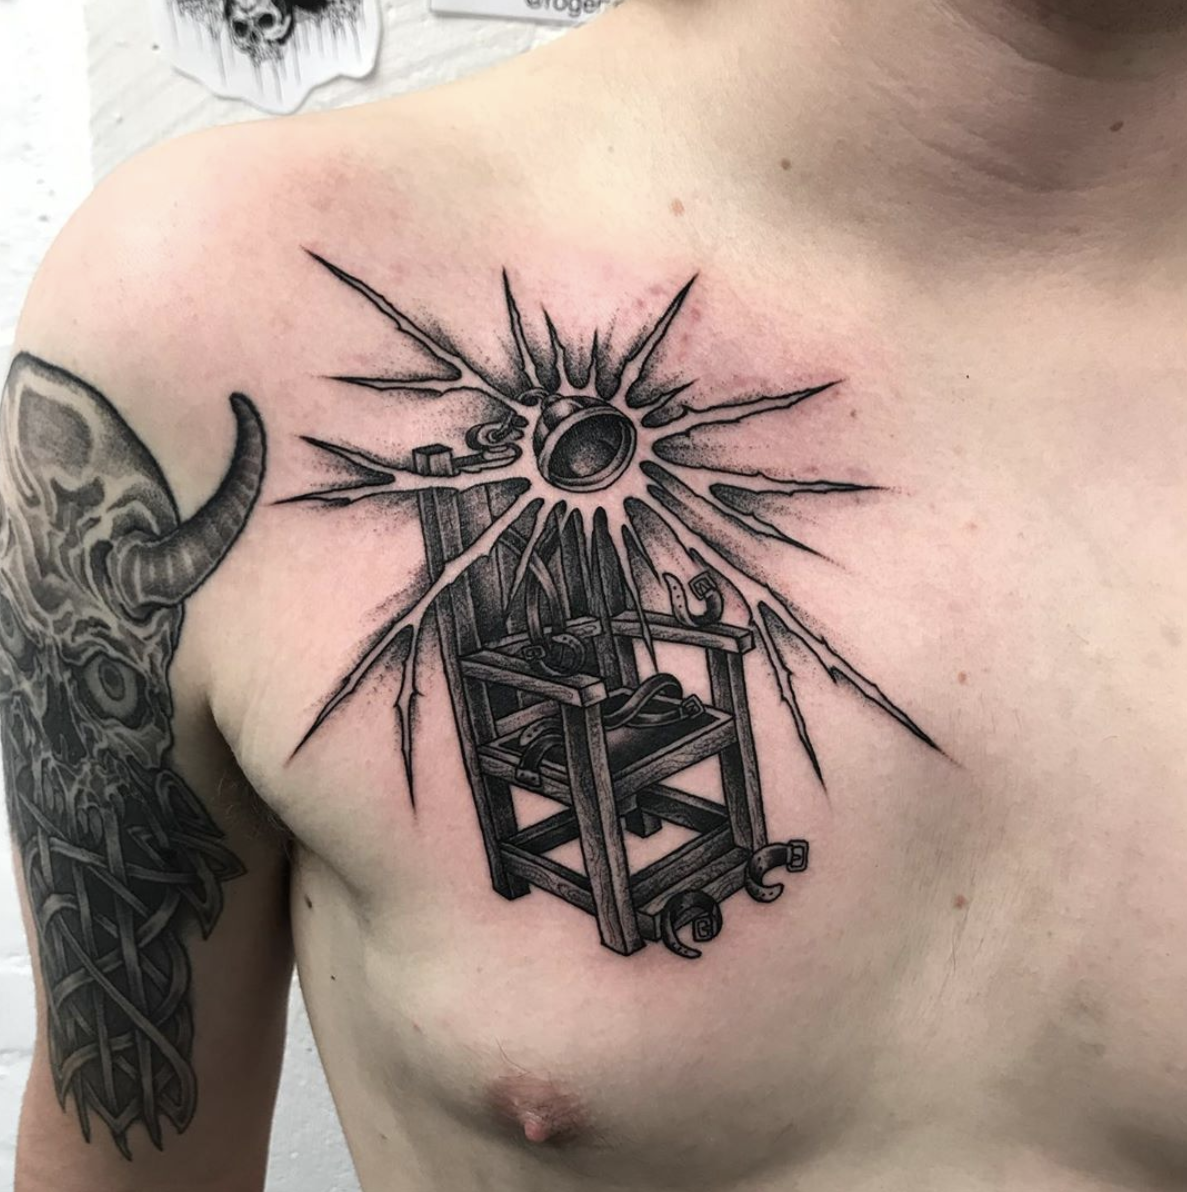 Black Onyx Empire Tattoo - Electric chair⚡️ by @swoiyuken • He's available  for bookings!📆 | Facebook